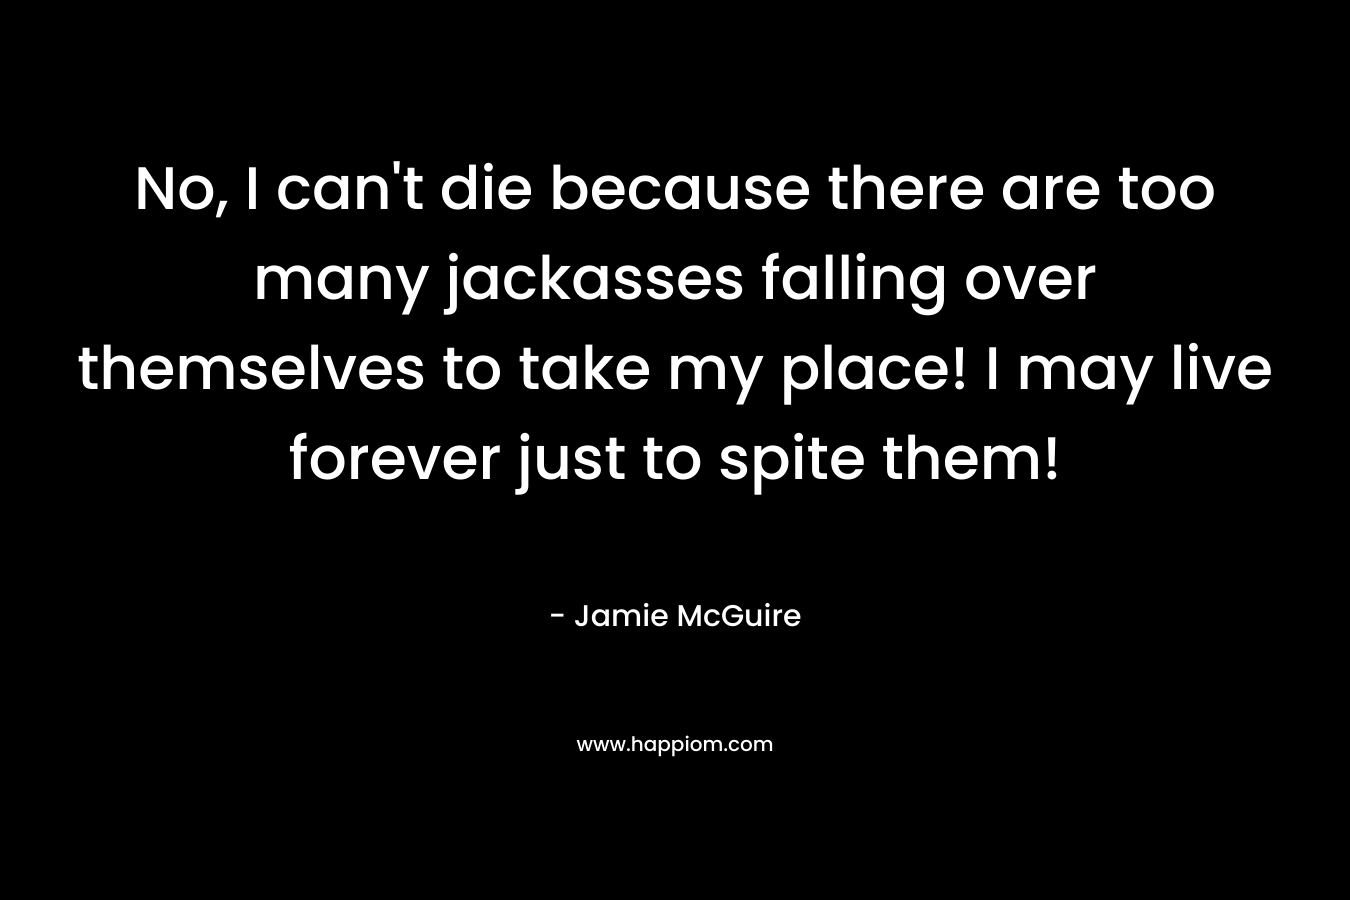 No, I can’t die because there are too many jackasses falling over themselves to take my place! I may live forever just to spite them! – Jamie McGuire